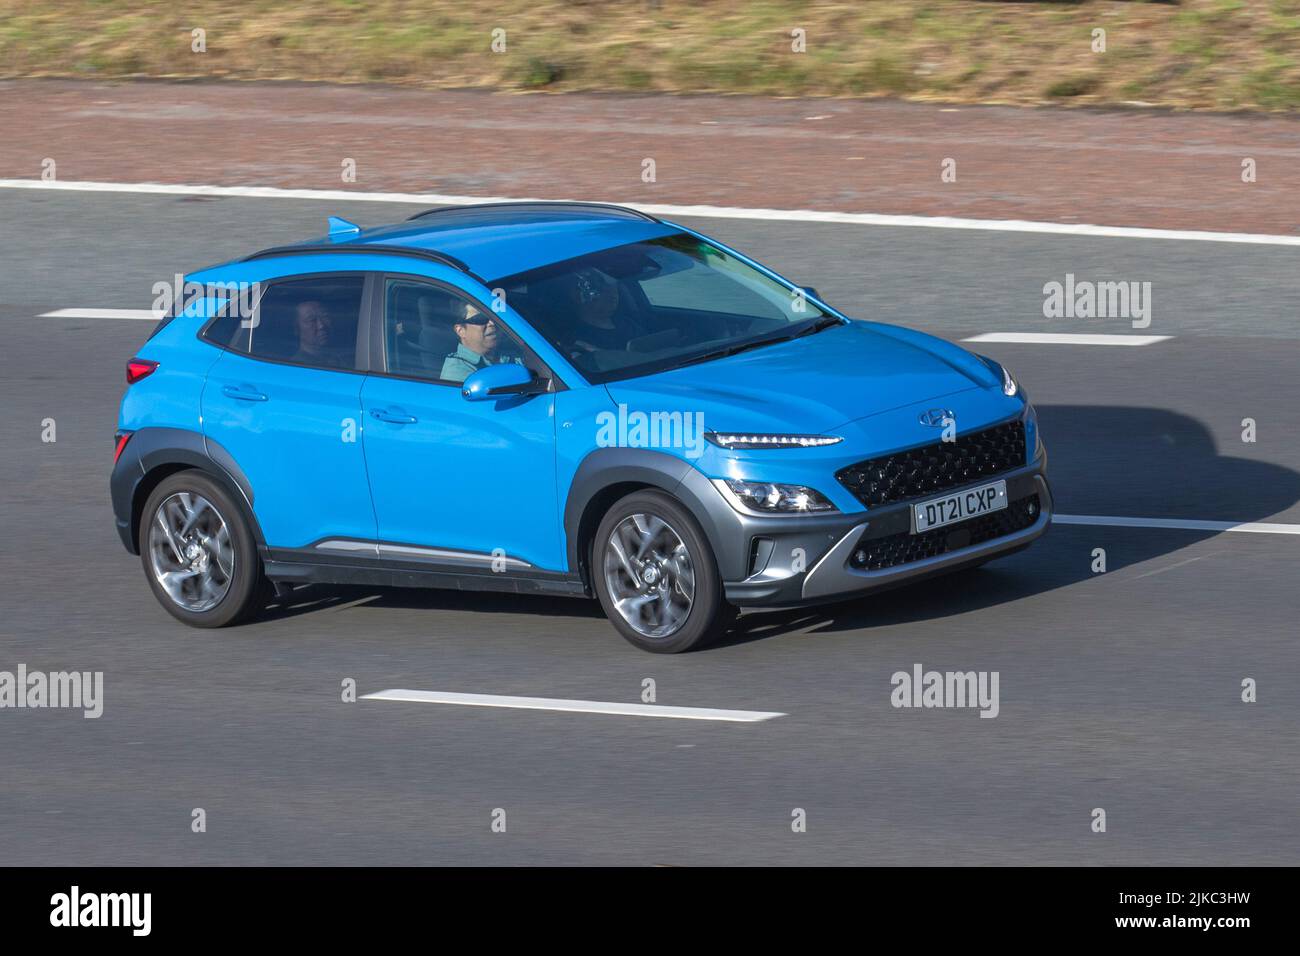 2021 blue HYUNDAI Hybrid Electric KONA Premium GDi Hev S-A 1580cc; moving, being driven, in motion, travelling on the M6 motorway, UK Stock Photo